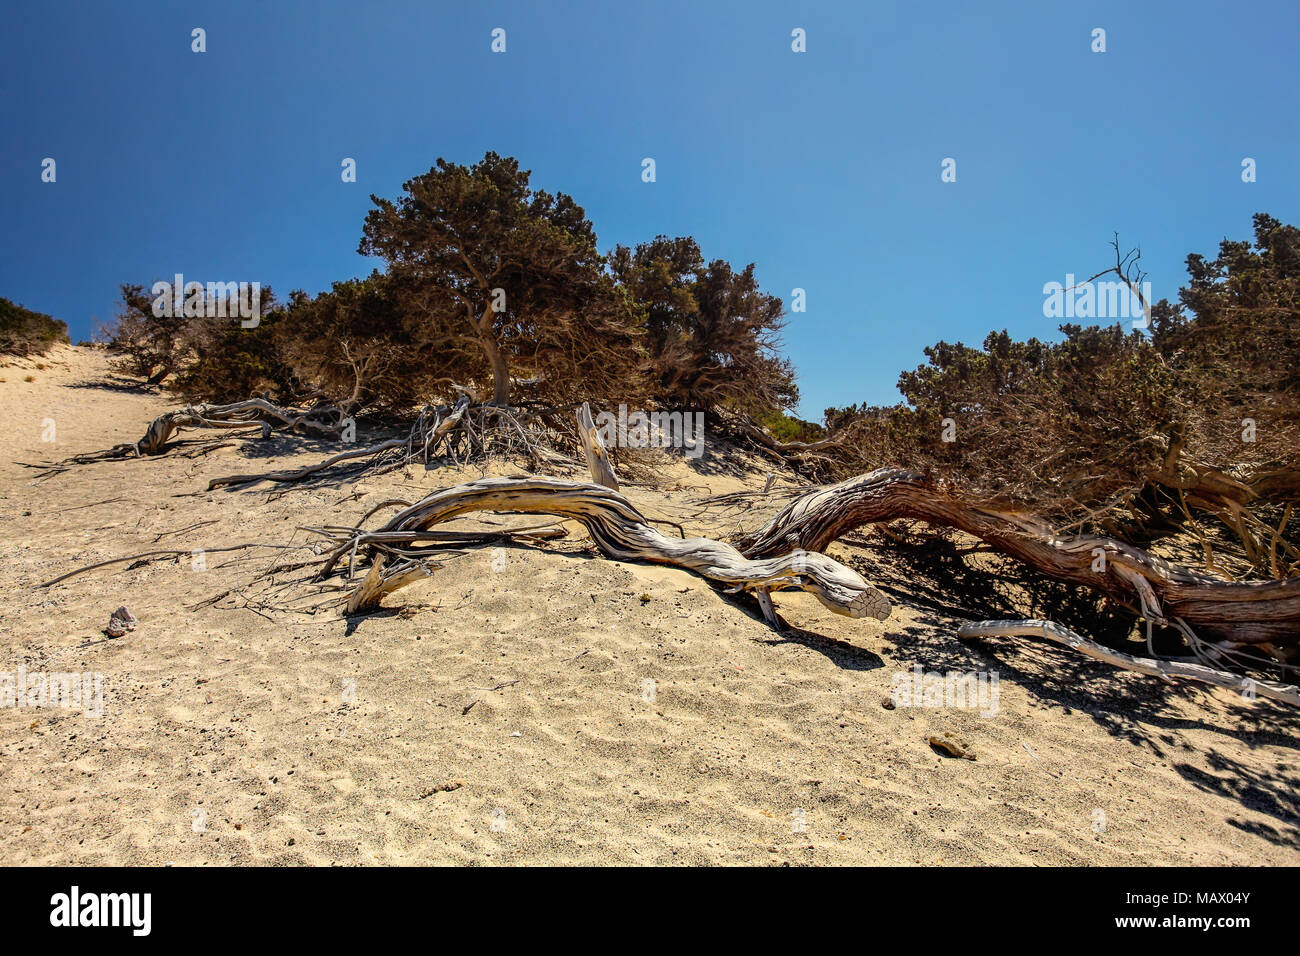 Dry large-fruited juniper (Juniperus macrocarpa) trees on sandy hill with deep blue sky in background. Chrysi island, Ierapetra, Greece Stock Photo